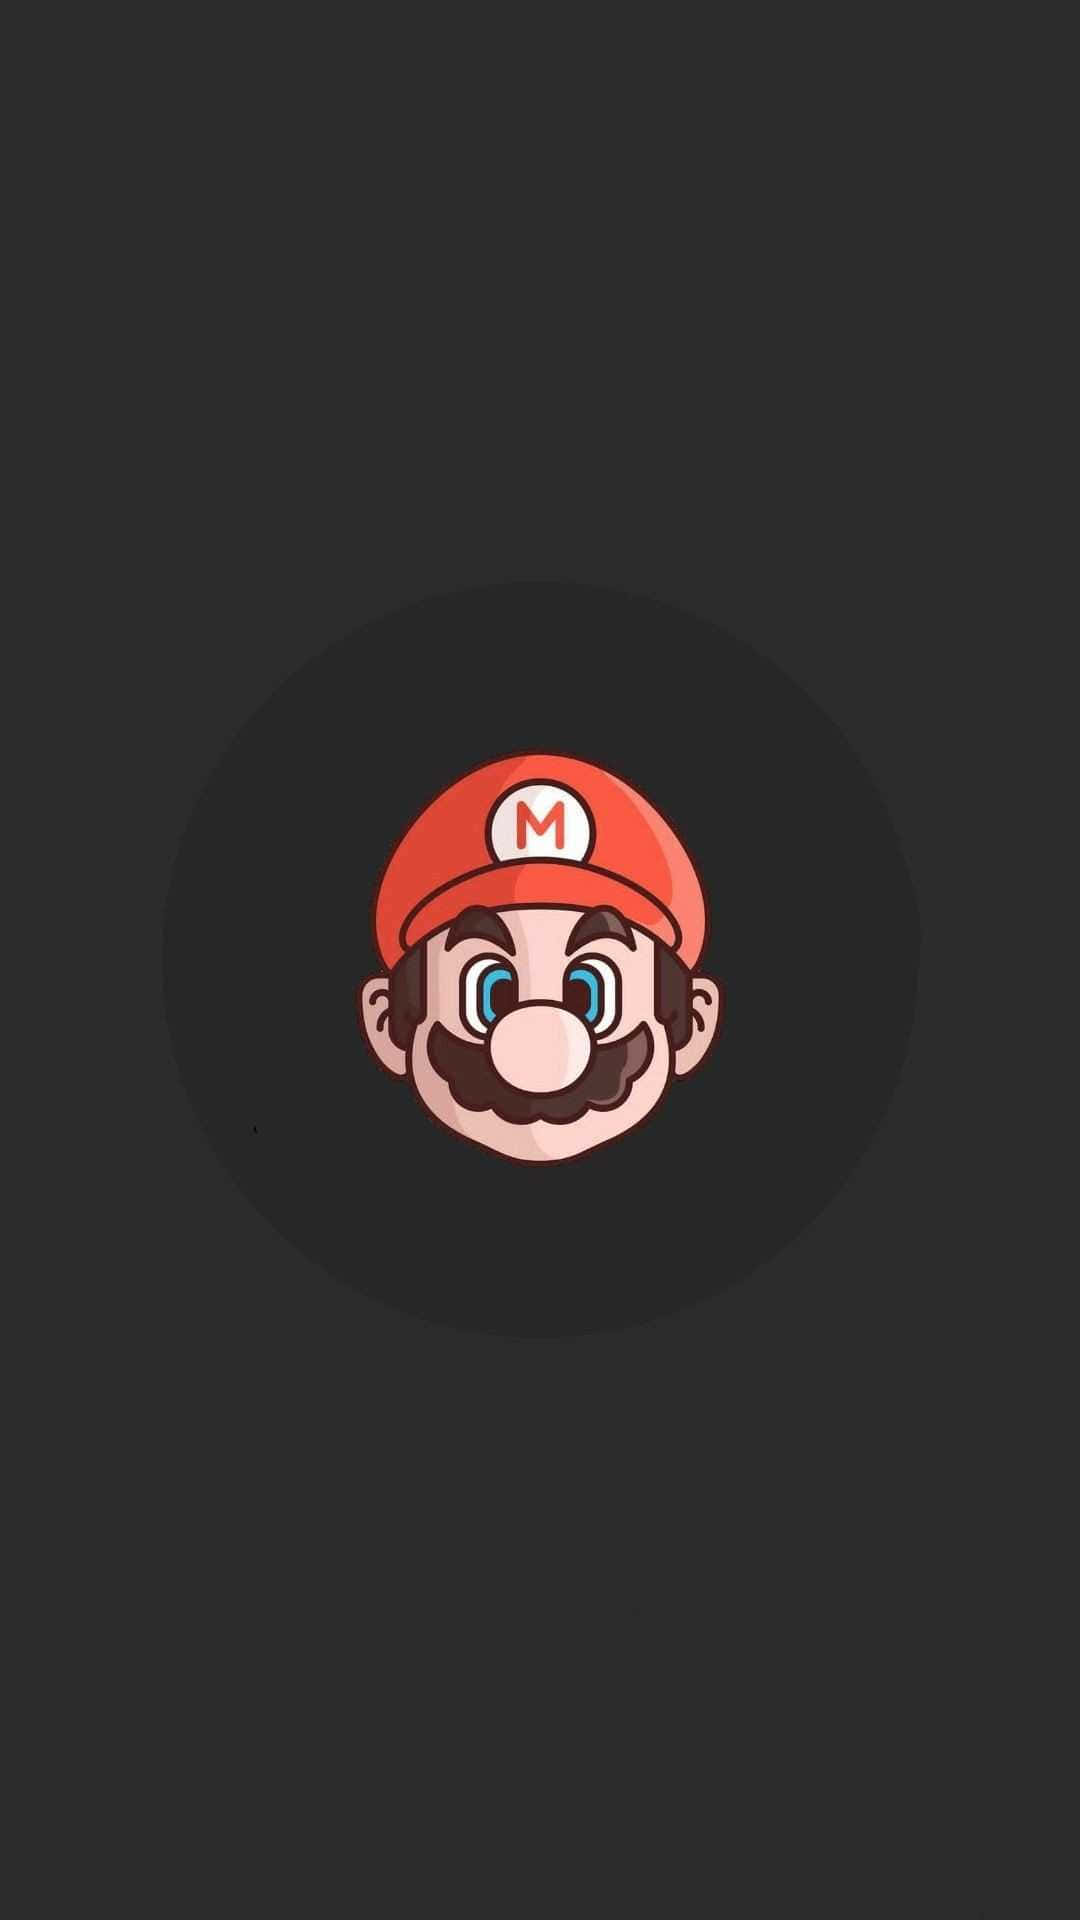 Mario the cool plumber ready for action. Wallpaper